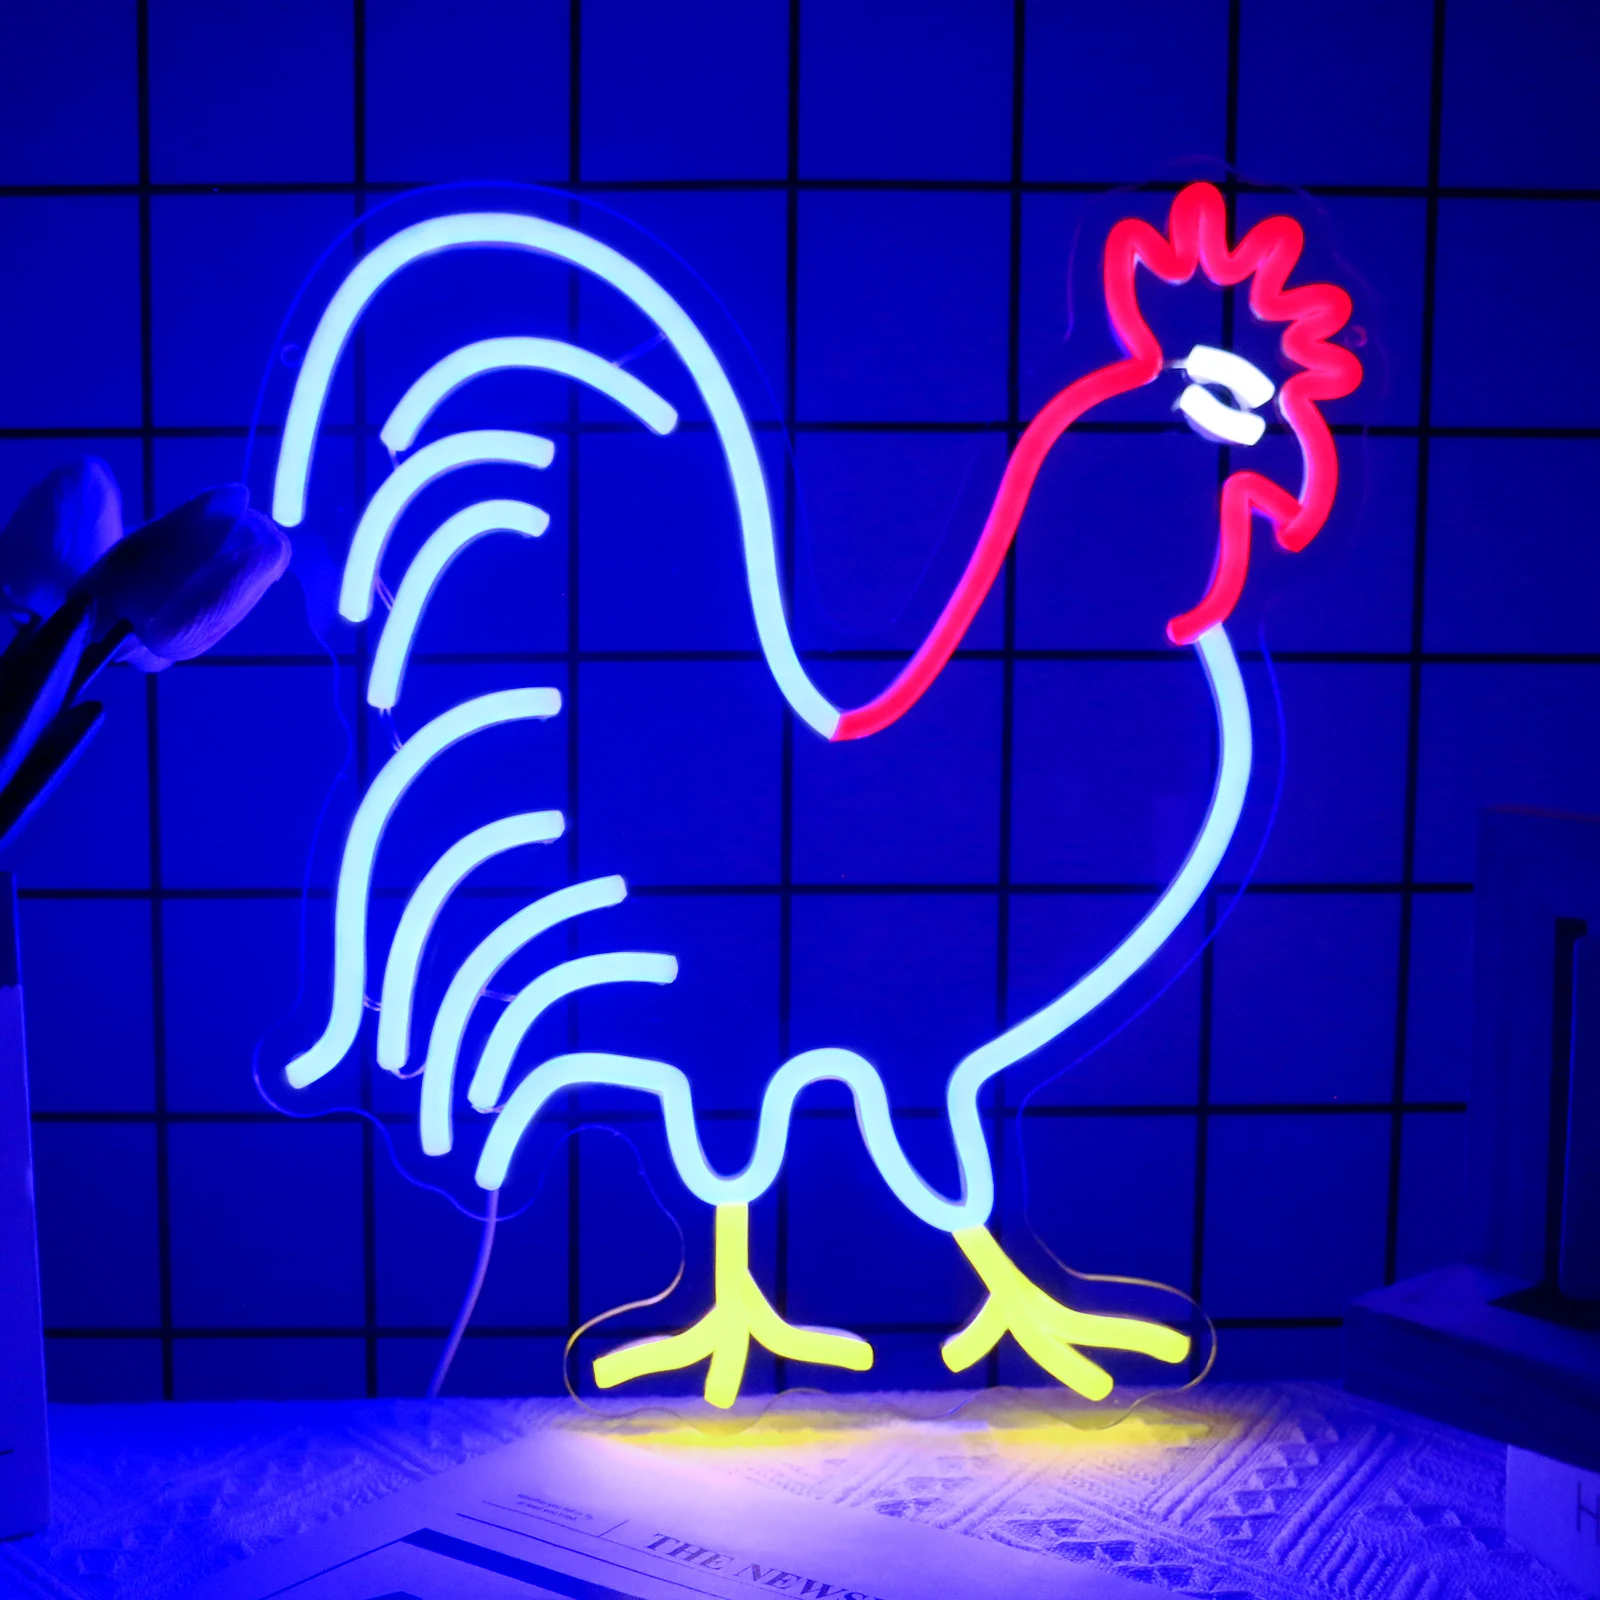 

UponRay Rooster Neon Sign LED Neon Lights for Wall Decor Animal Preppy Lights Room Decor Birthday Party Gift Decoration